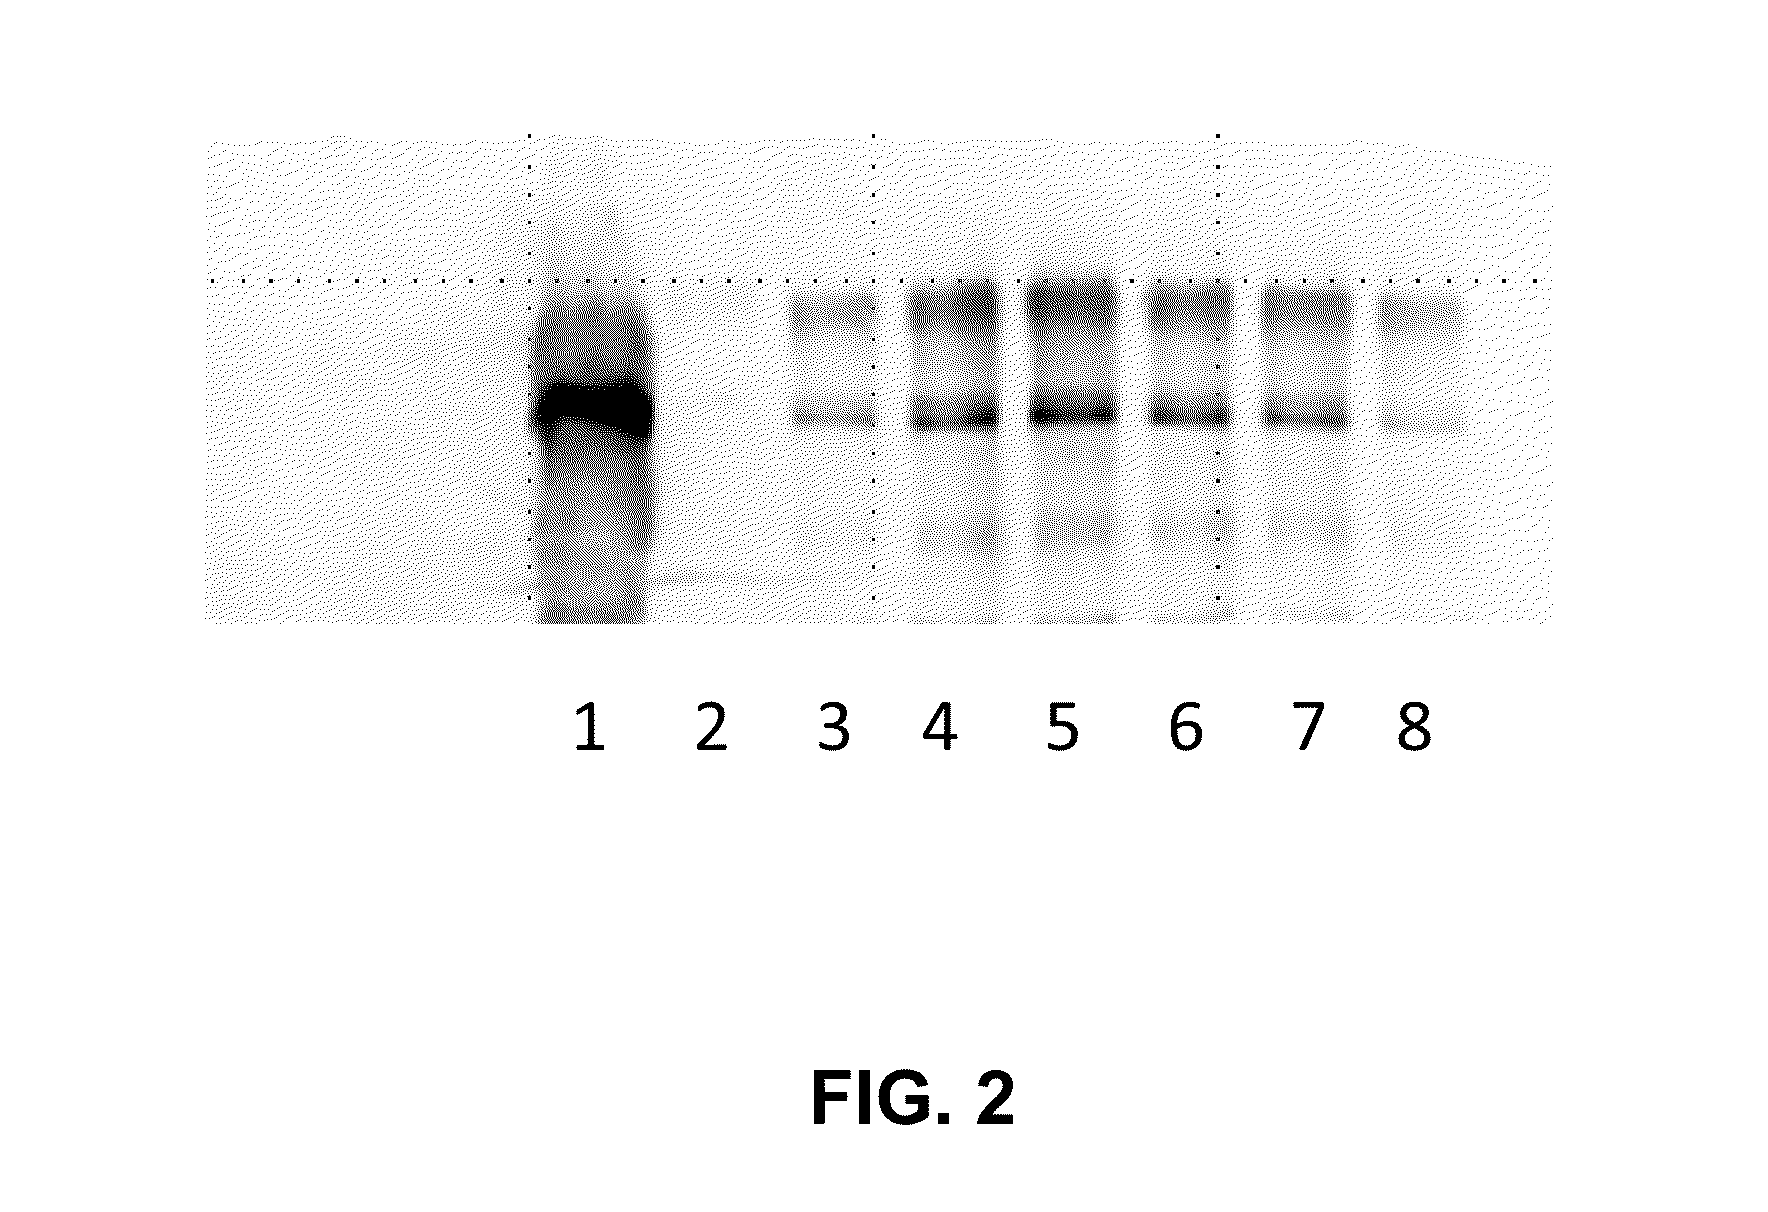 Composition and method for modulating inflammatory molecules with amylase